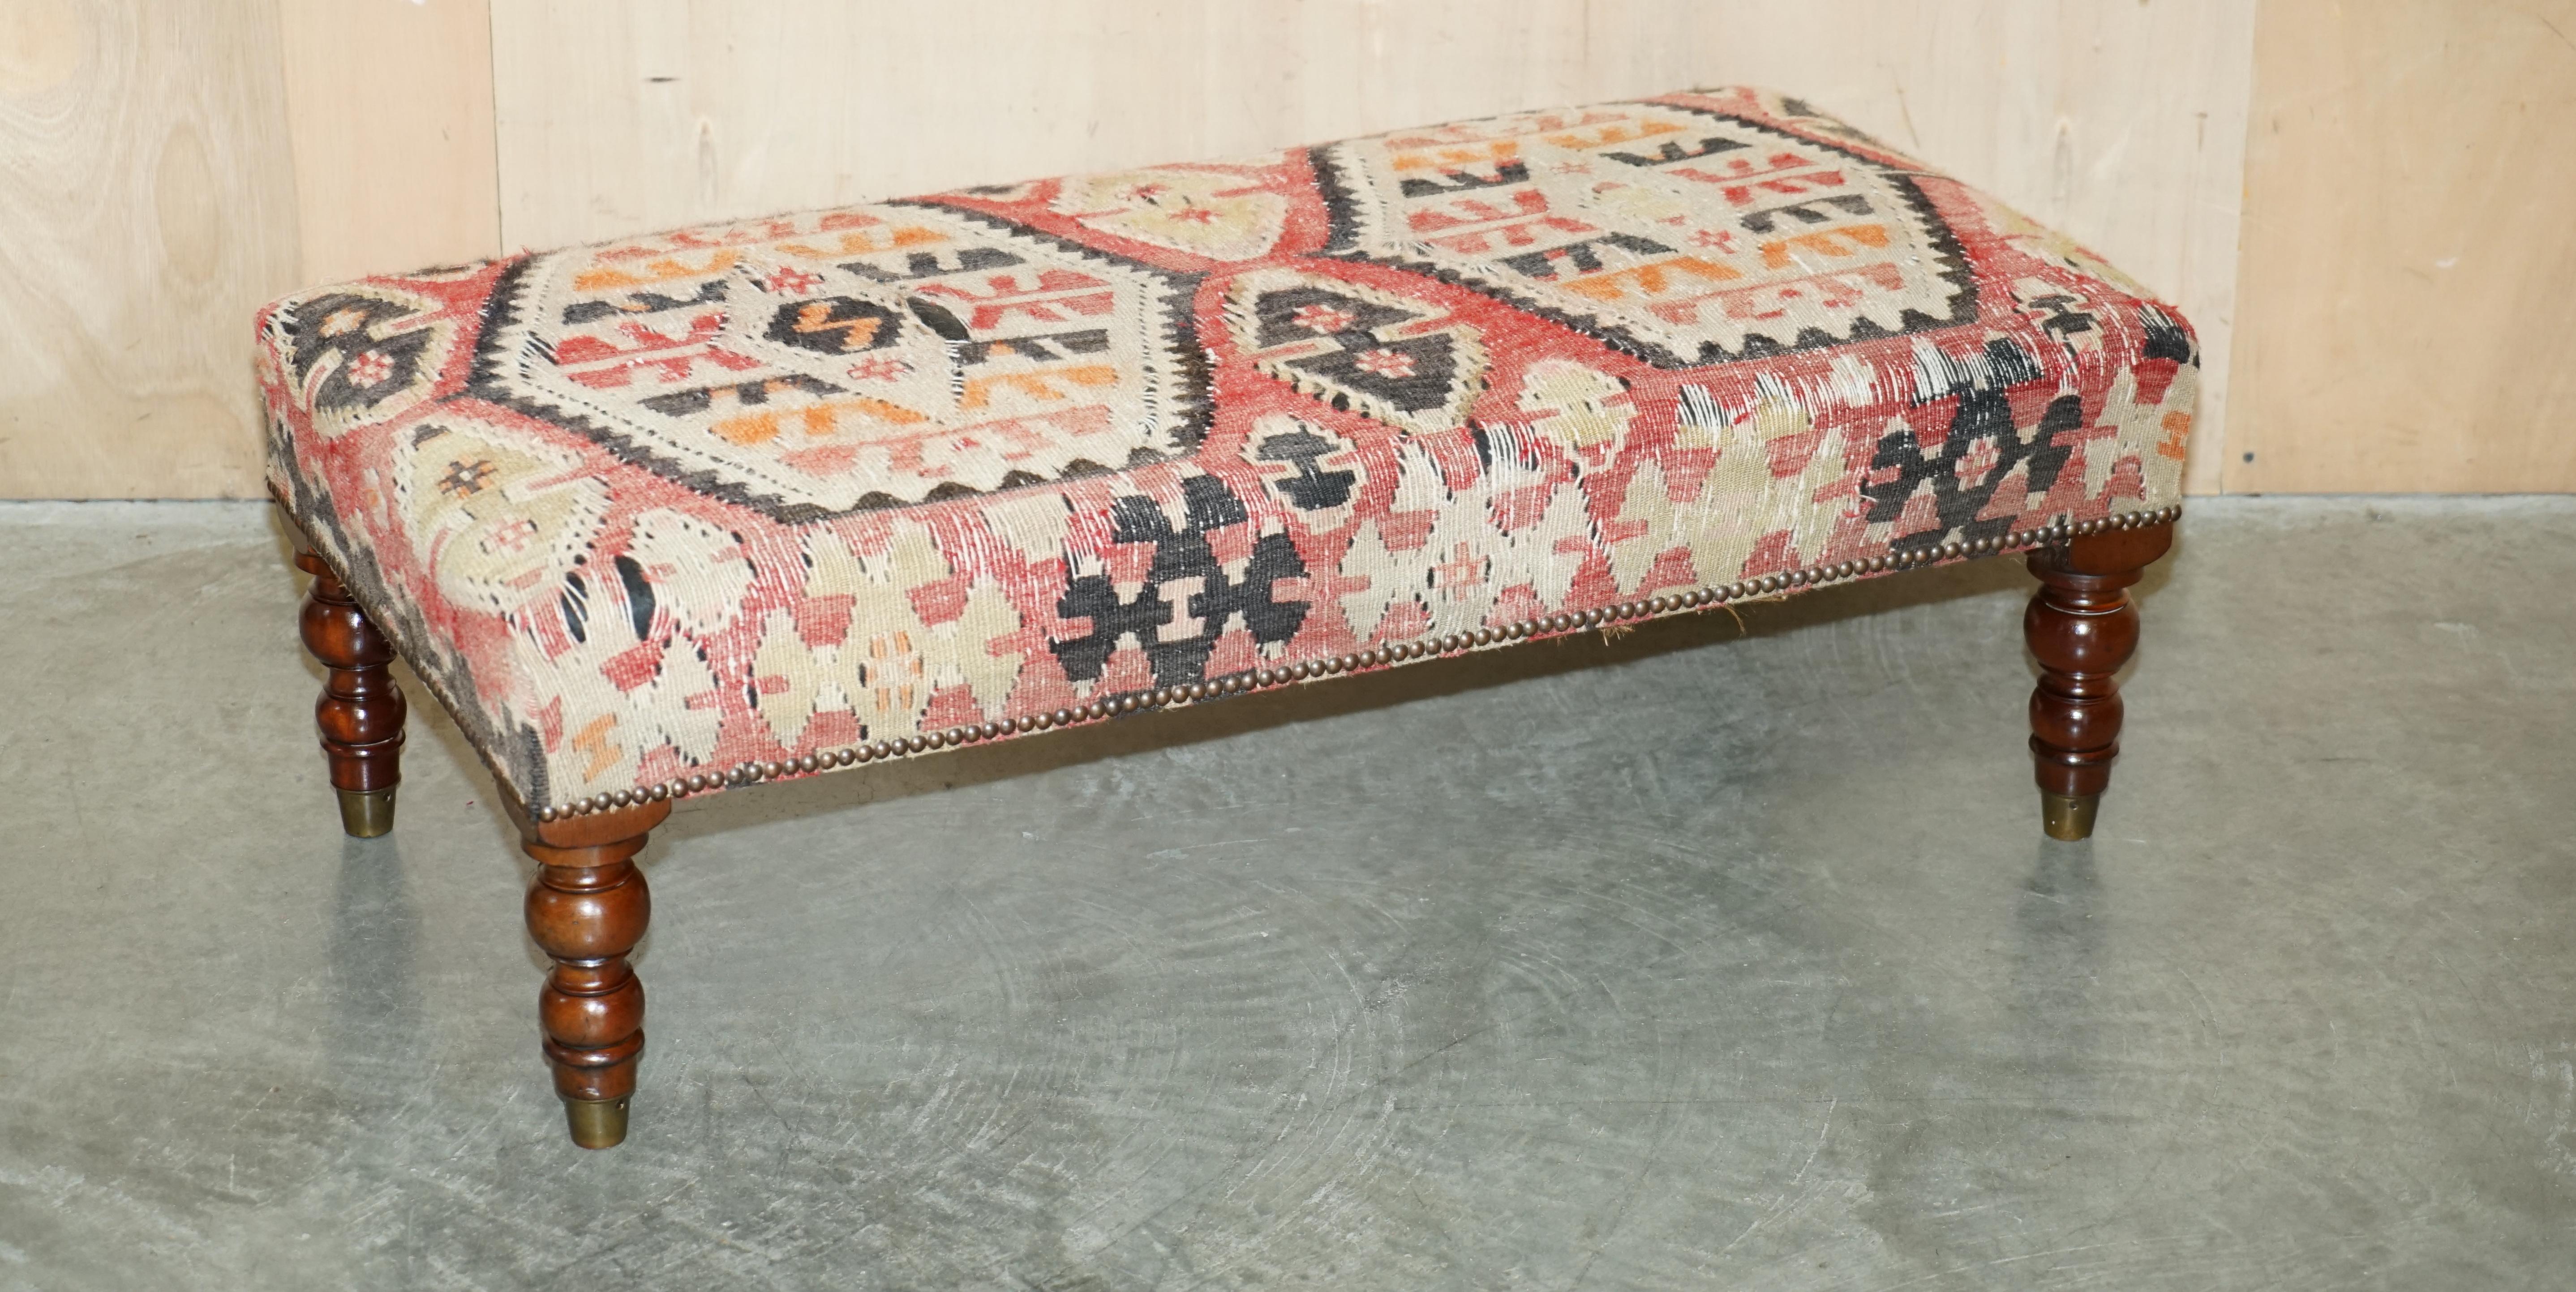 Royal House Antiques

Royal House Antiques is delighted to offer for sale this exquisite and highly collectable Vintage George Smith Kilim Ottoman 

Please note the delivery fee listing is just a guide and covers London only for the UK and local